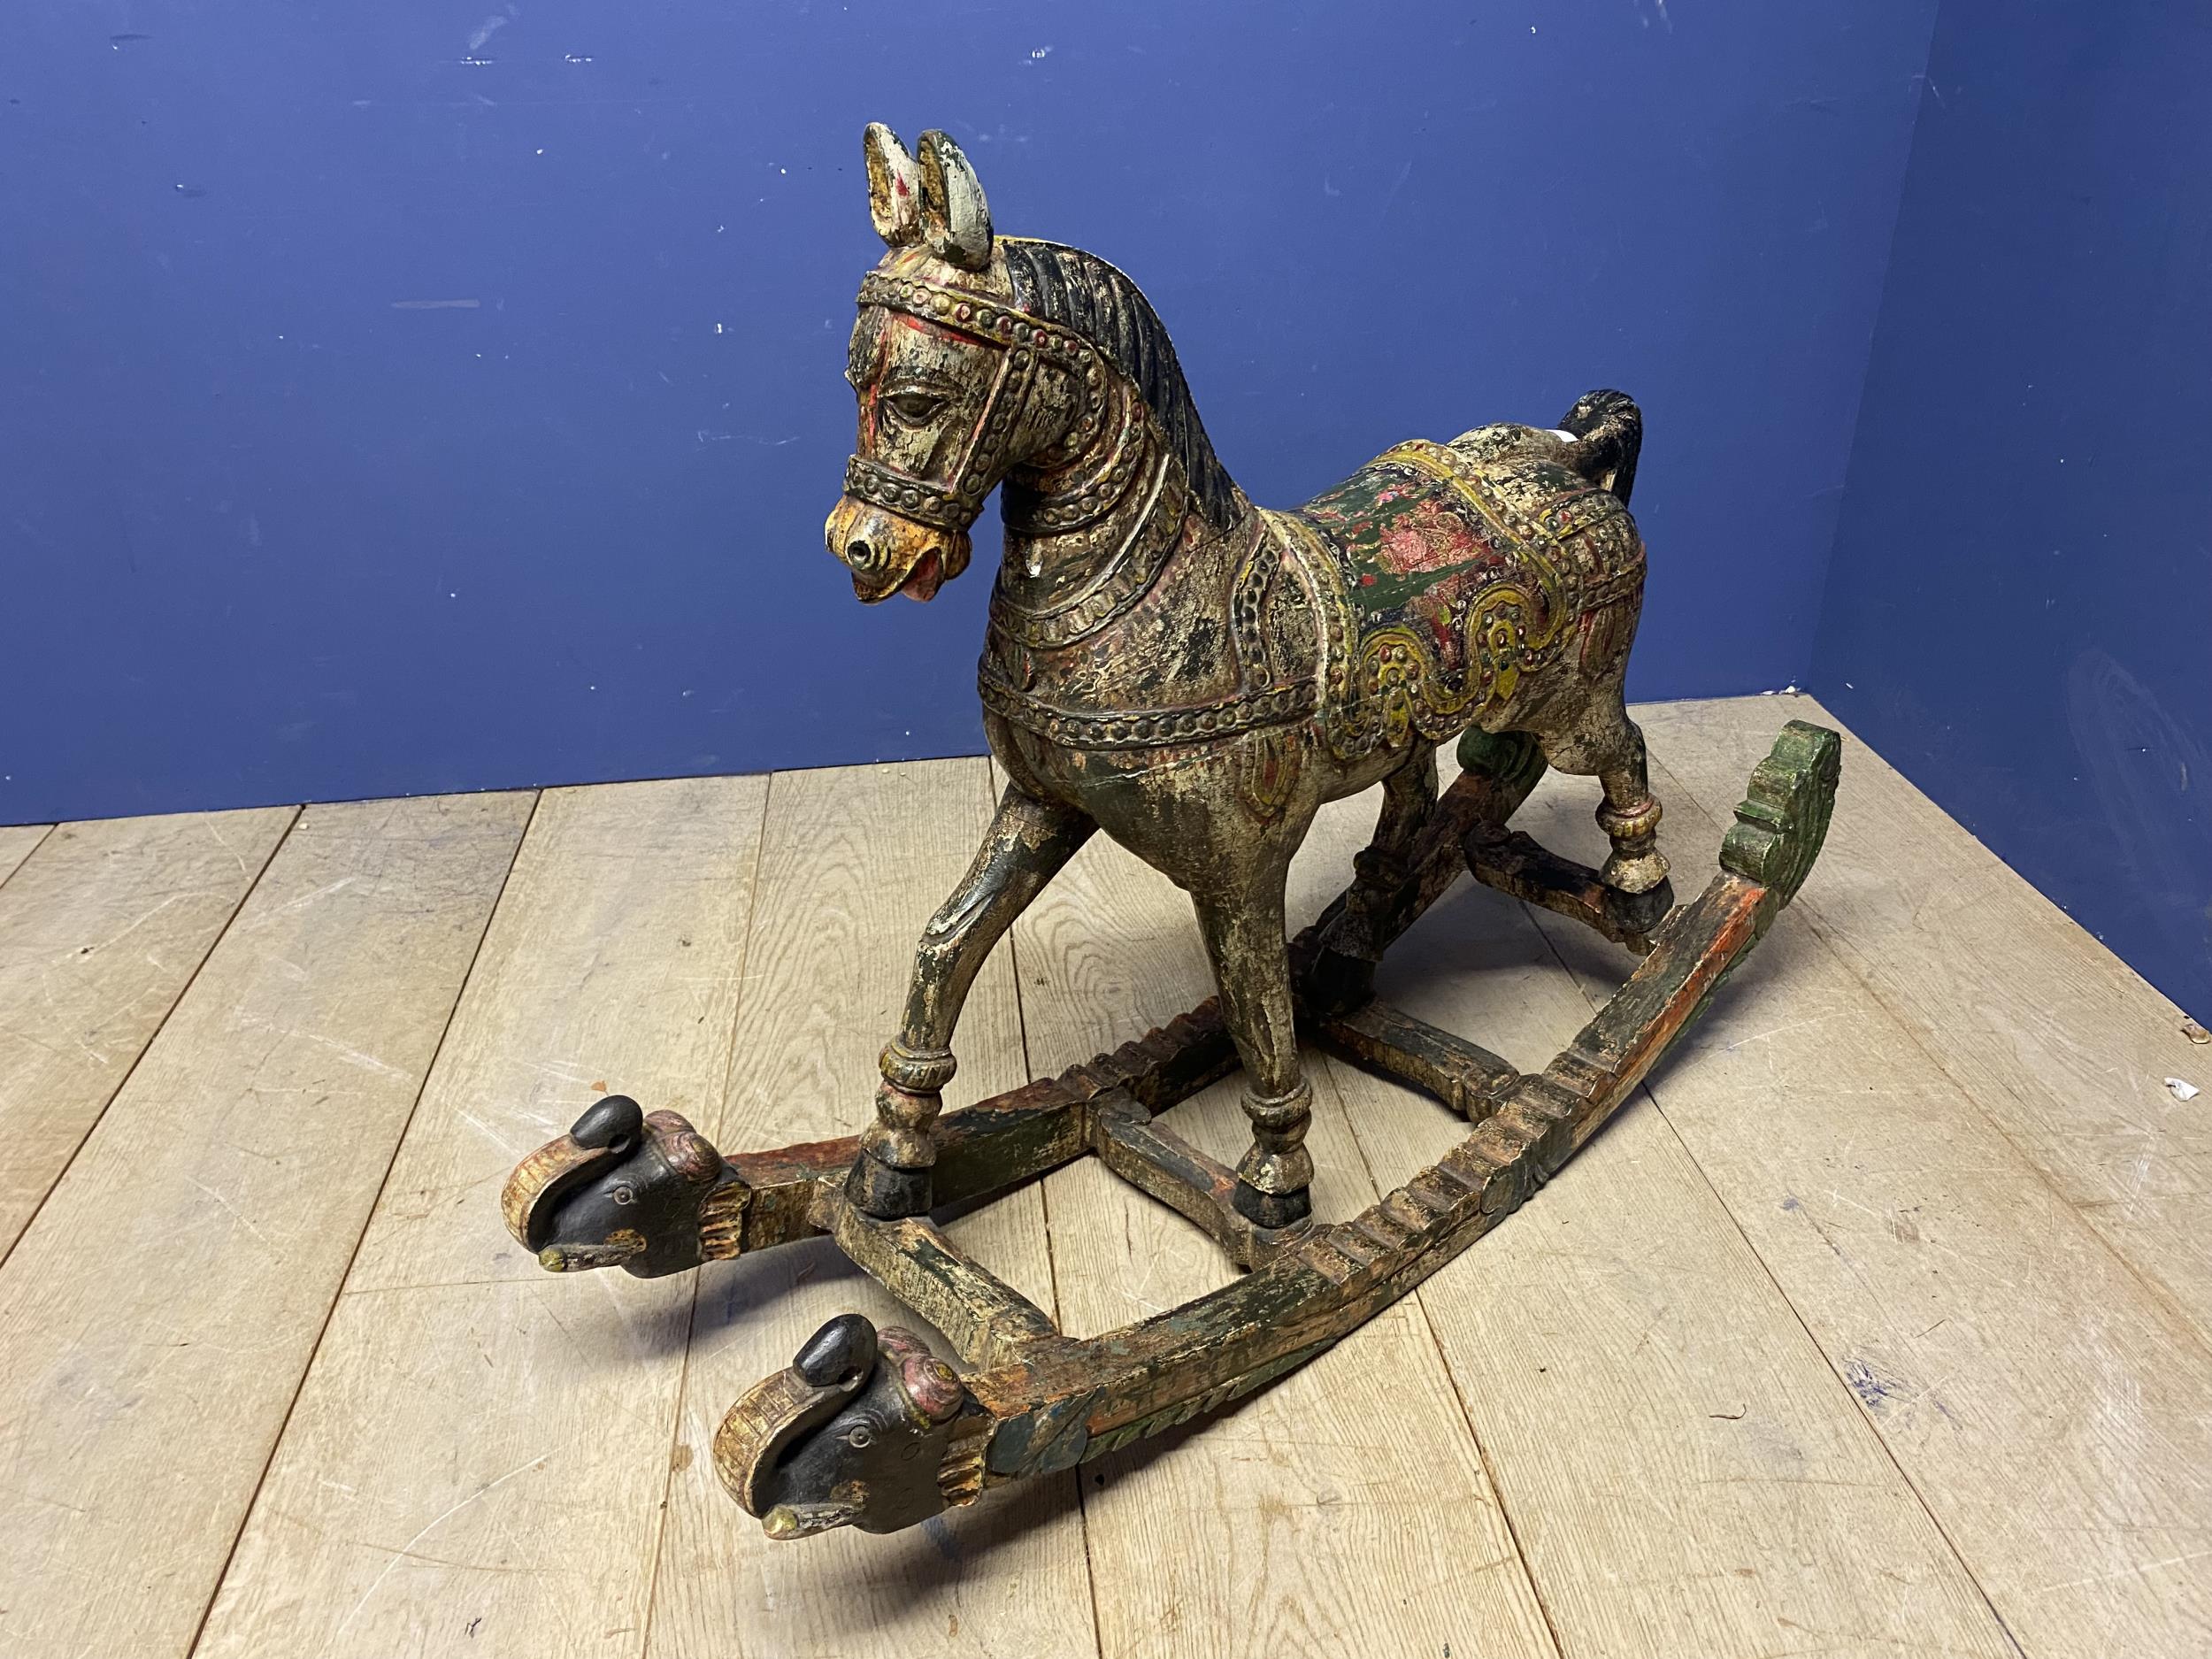 Small decorative painted rocking horse 104x78 cm - Image 2 of 2